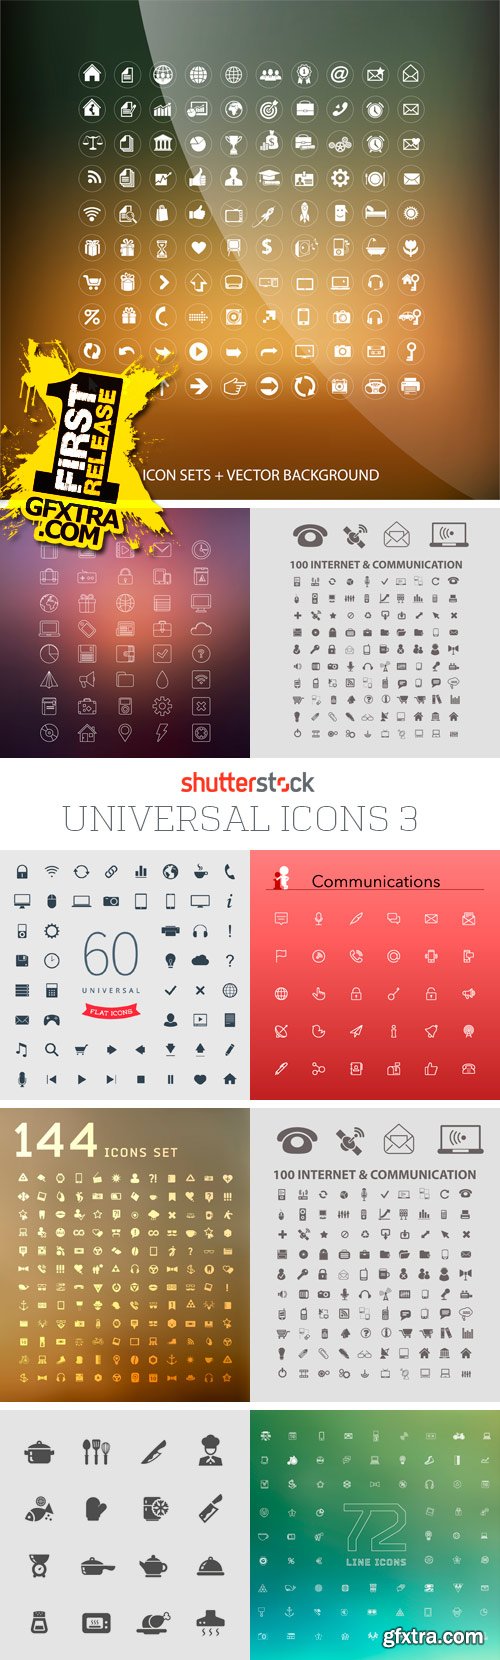 Amazing SS - Universal Icons 3, 25xEPS